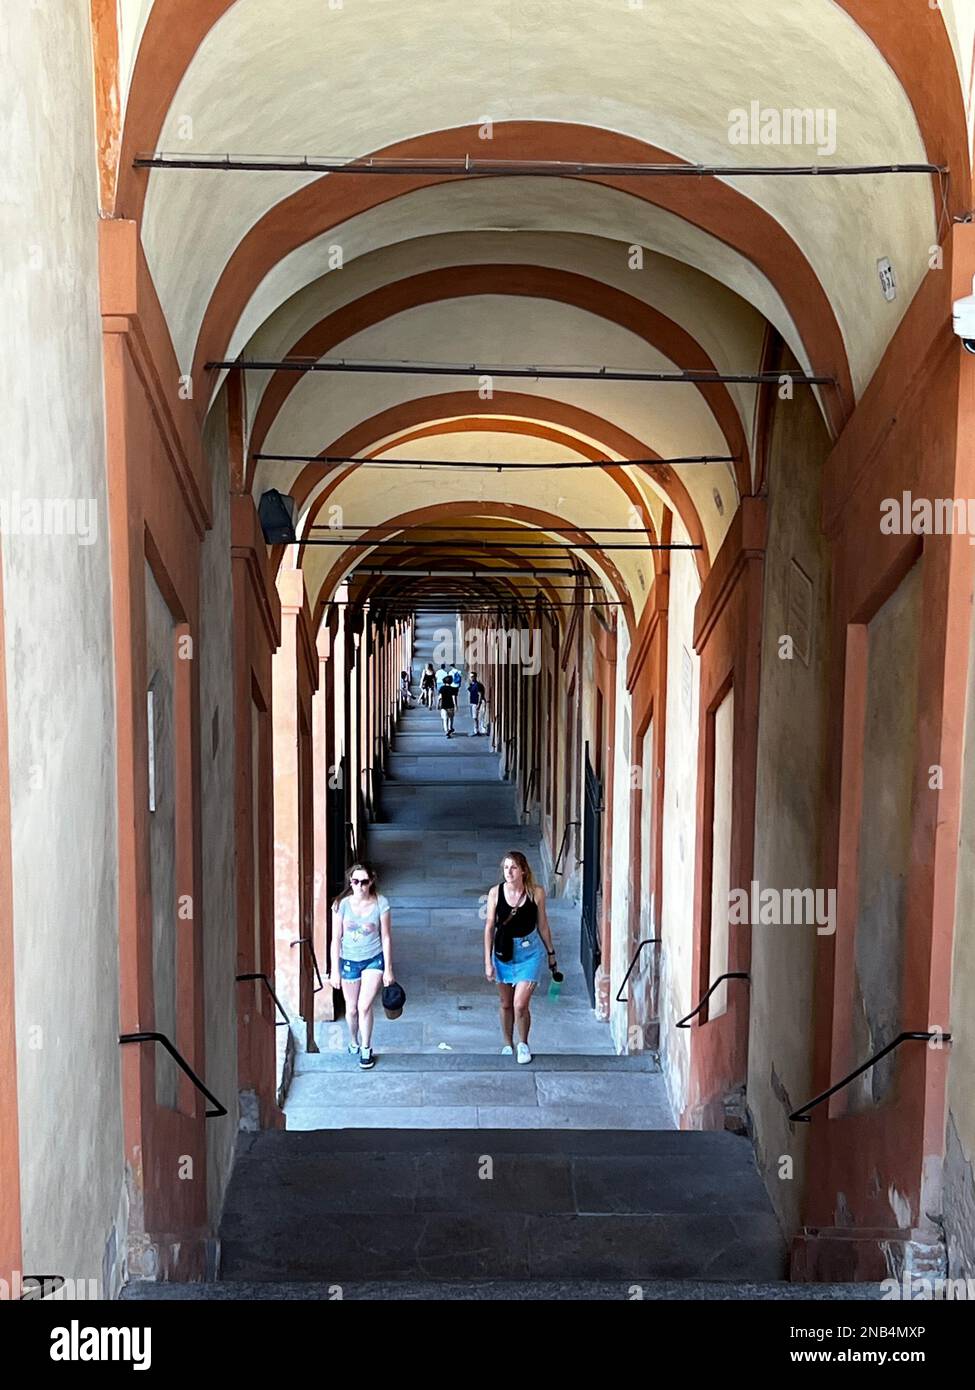 Known as the City of Porticoes, Bologna Italy's network of covered porticoes extends over 24 miles (38 kilometers). The portico leading to the Sanctua Stock Photo